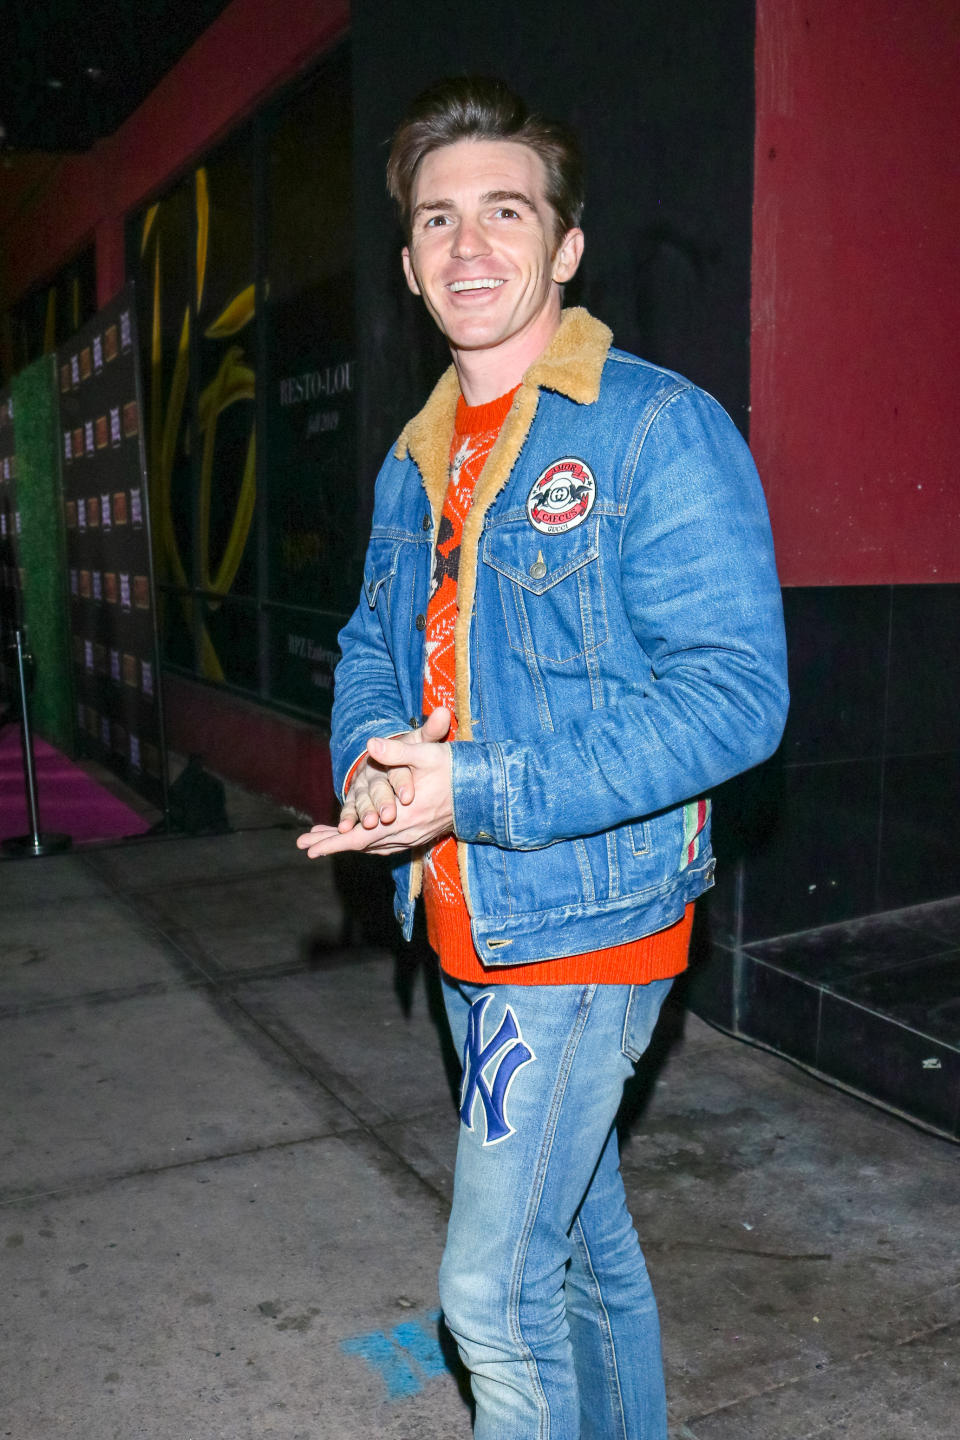 Drake Bell wearing a red t-shirt, jeans, and a jean jacket